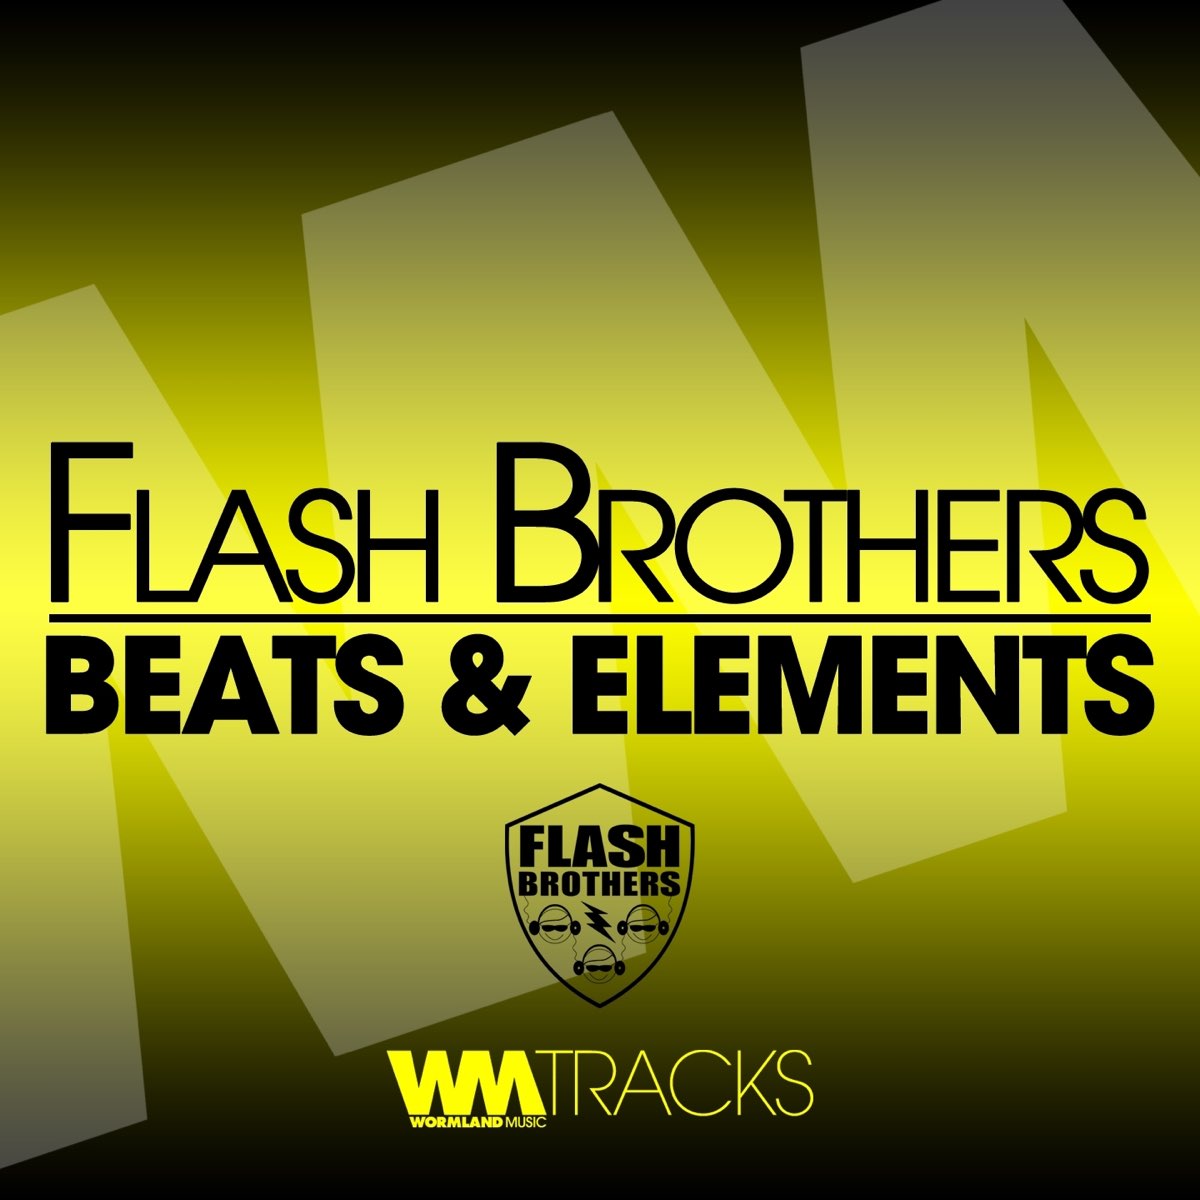 Beat brothers. Beat elements.